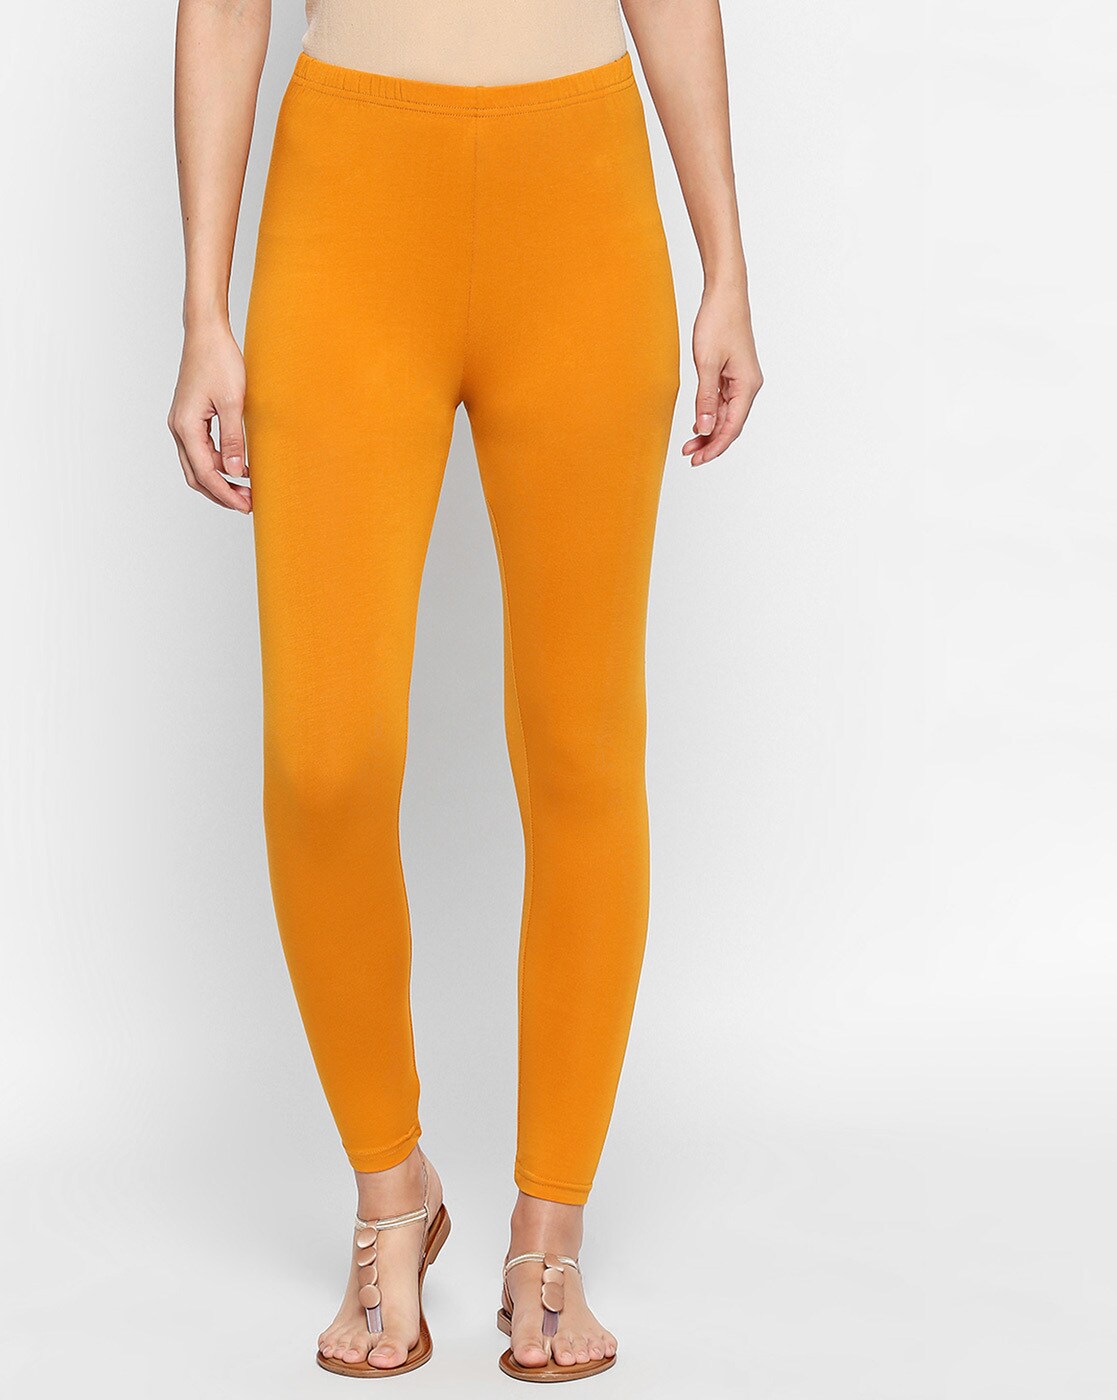 Buy Yellow Leggings for Women by Rangmanch by Pantaloons Online